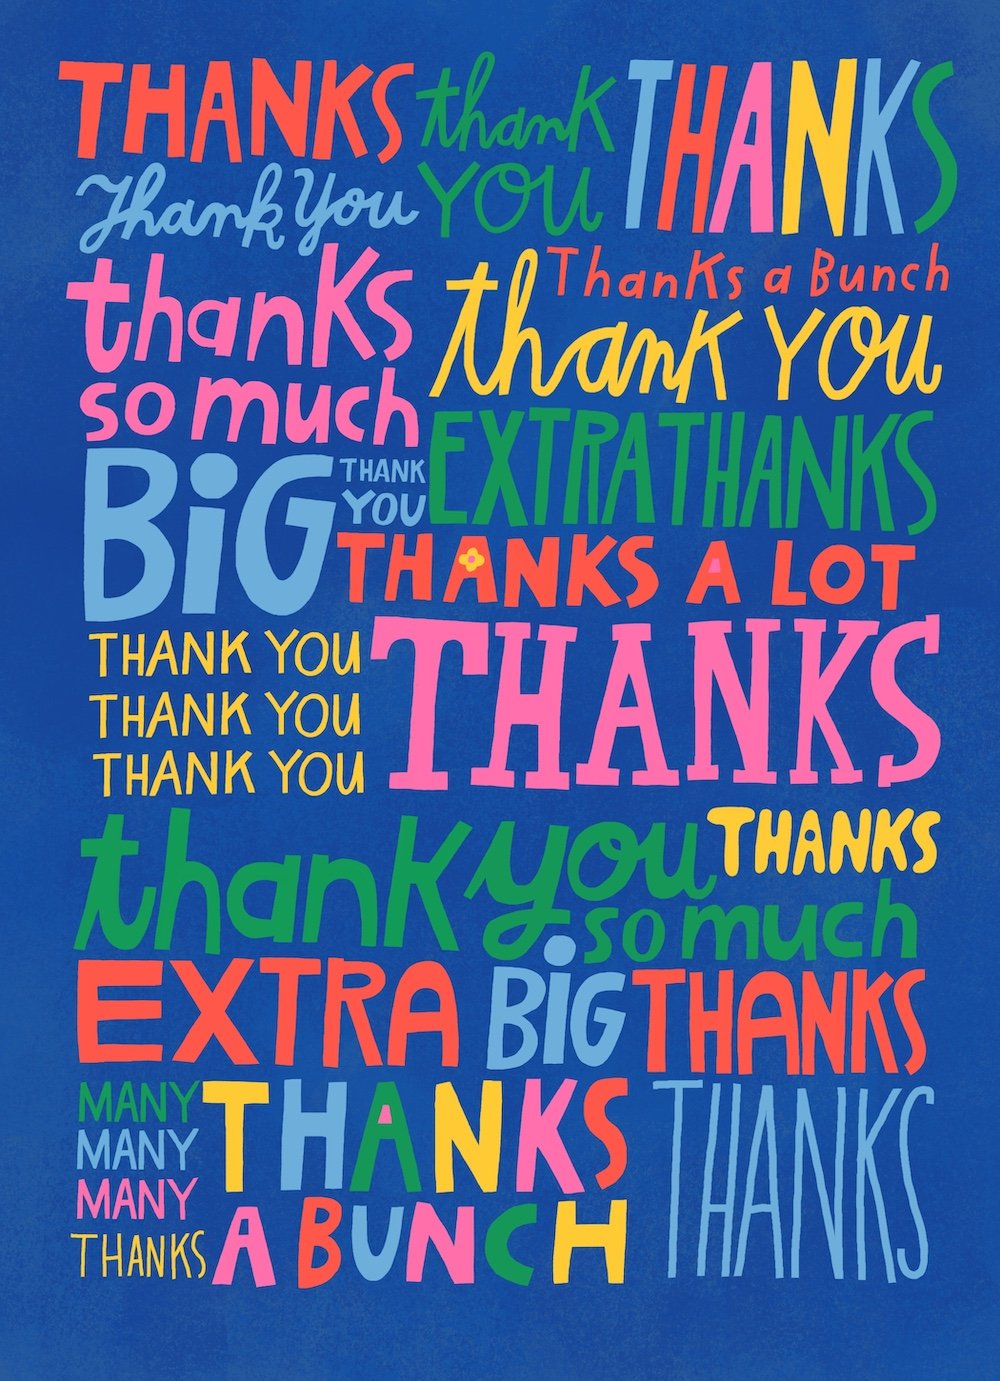 Many Thanks Greeting Card for Design House Greetings